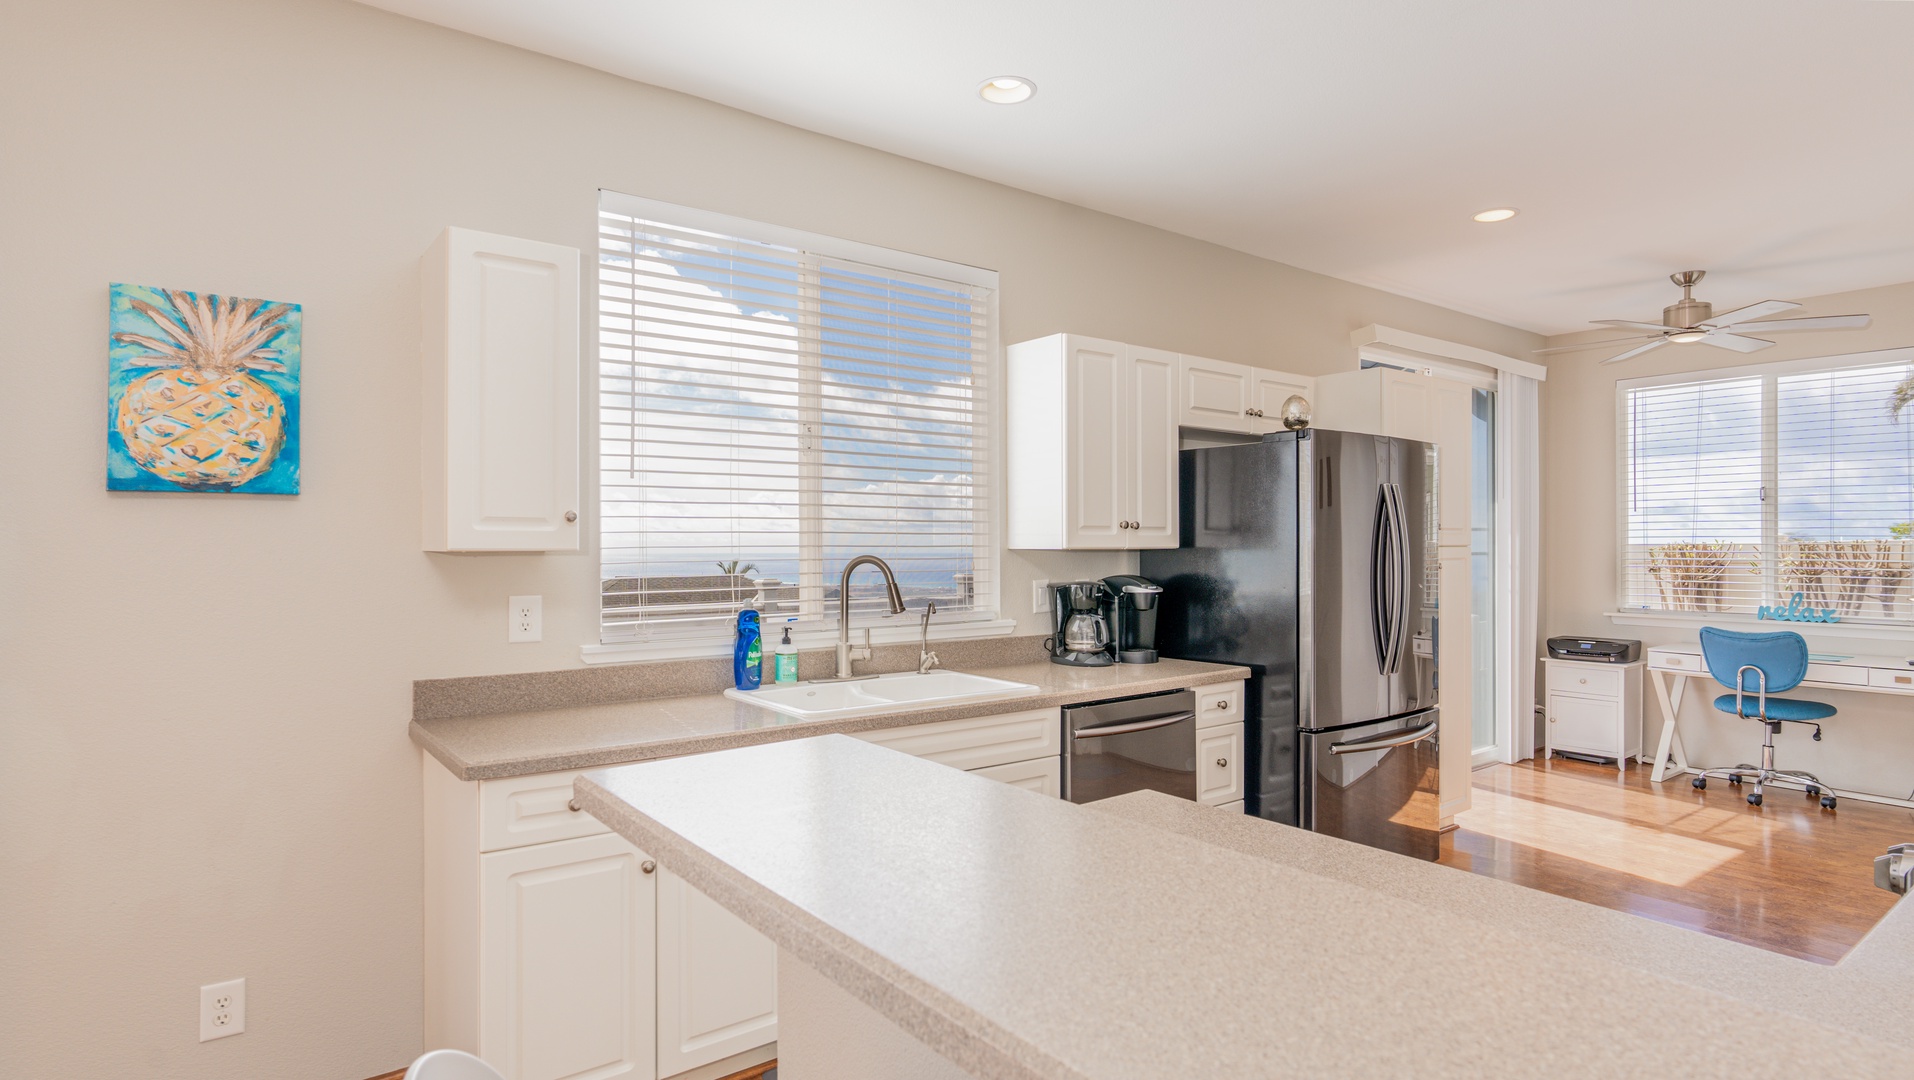 Kapolei Vacation Rentals, Makakilo Elele 48 - Breakfast bar for quick meals or entertainment.